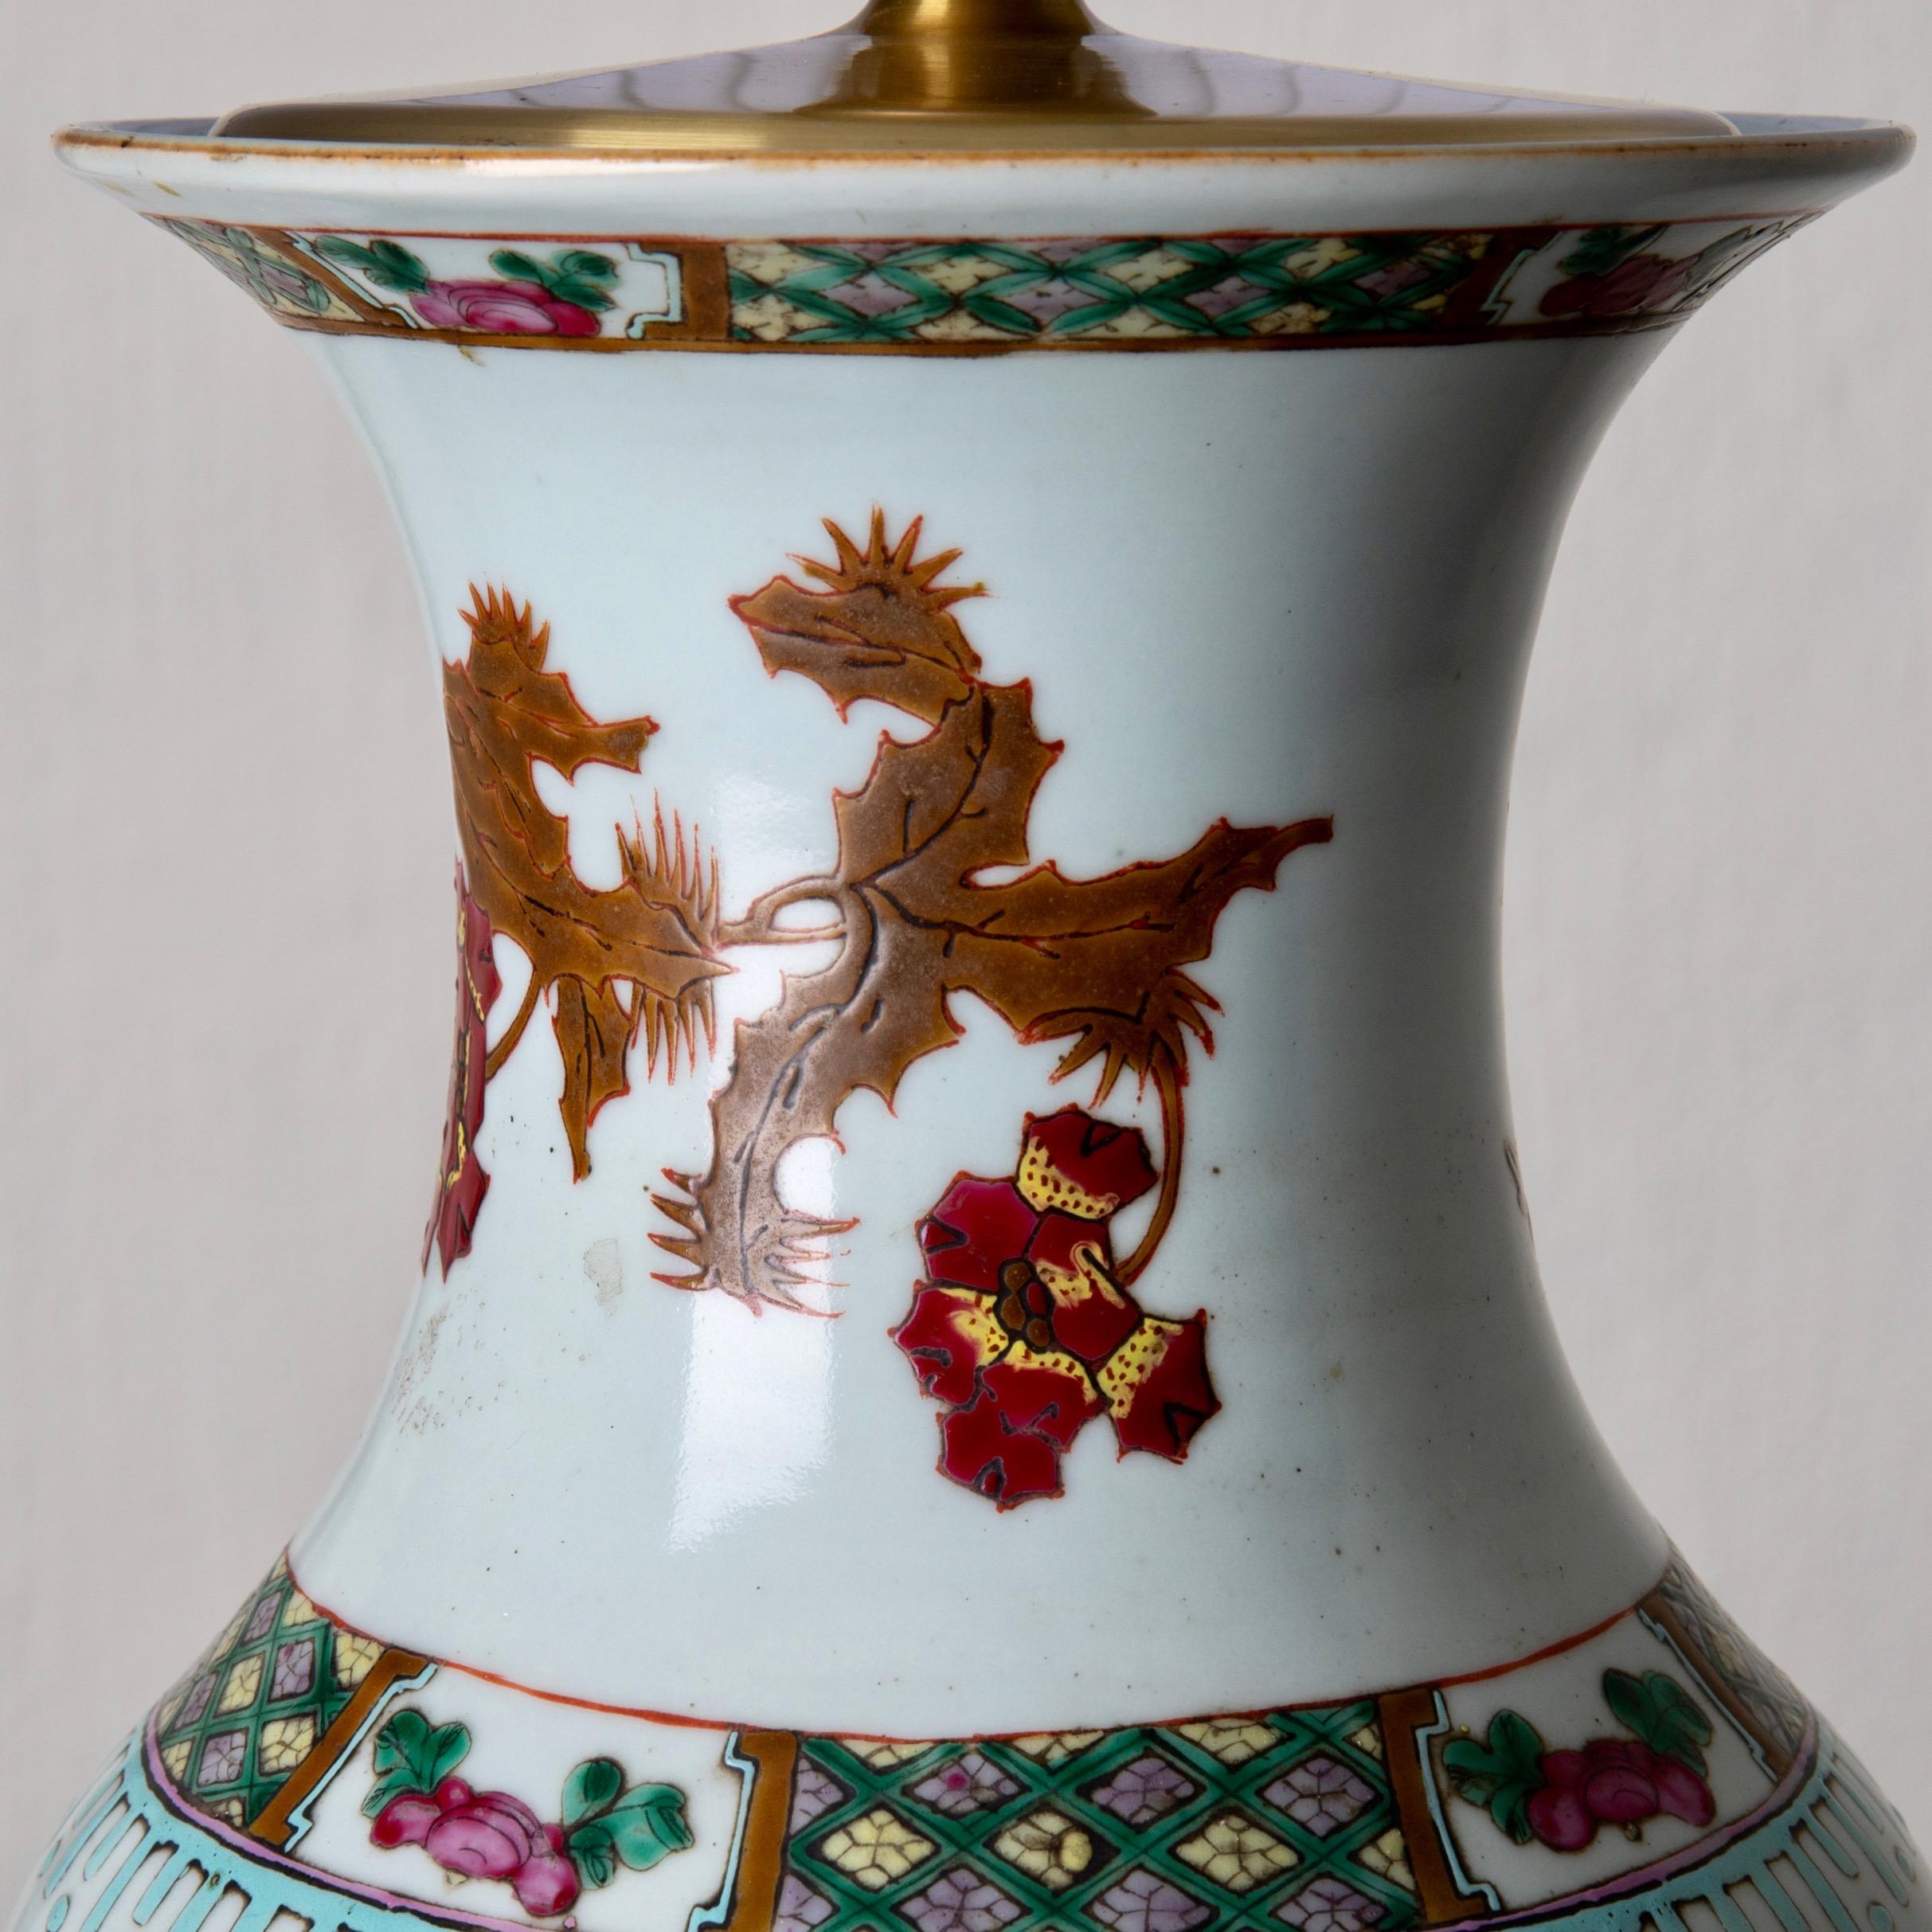 Lamp table oriental white red flowers 1920s, China. A table lamp in white porcelain with red floral pattern. Measures: H with shade 29”, H without shade 20”, diameter of foot 6”.